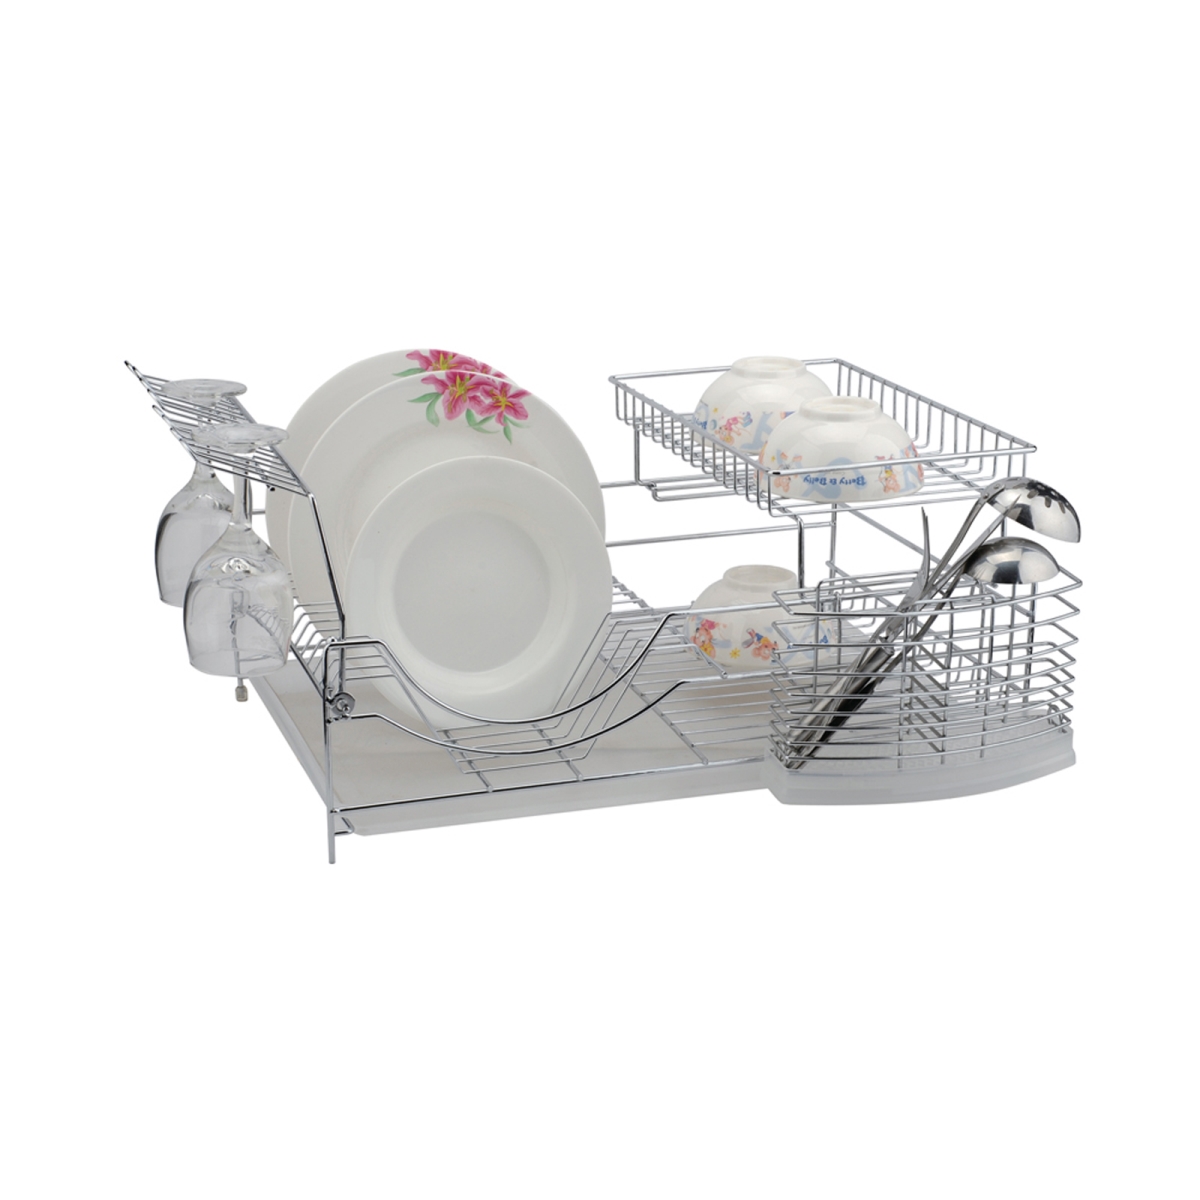 Picture of Better Chef DR-2202 22 in. Dish Rack